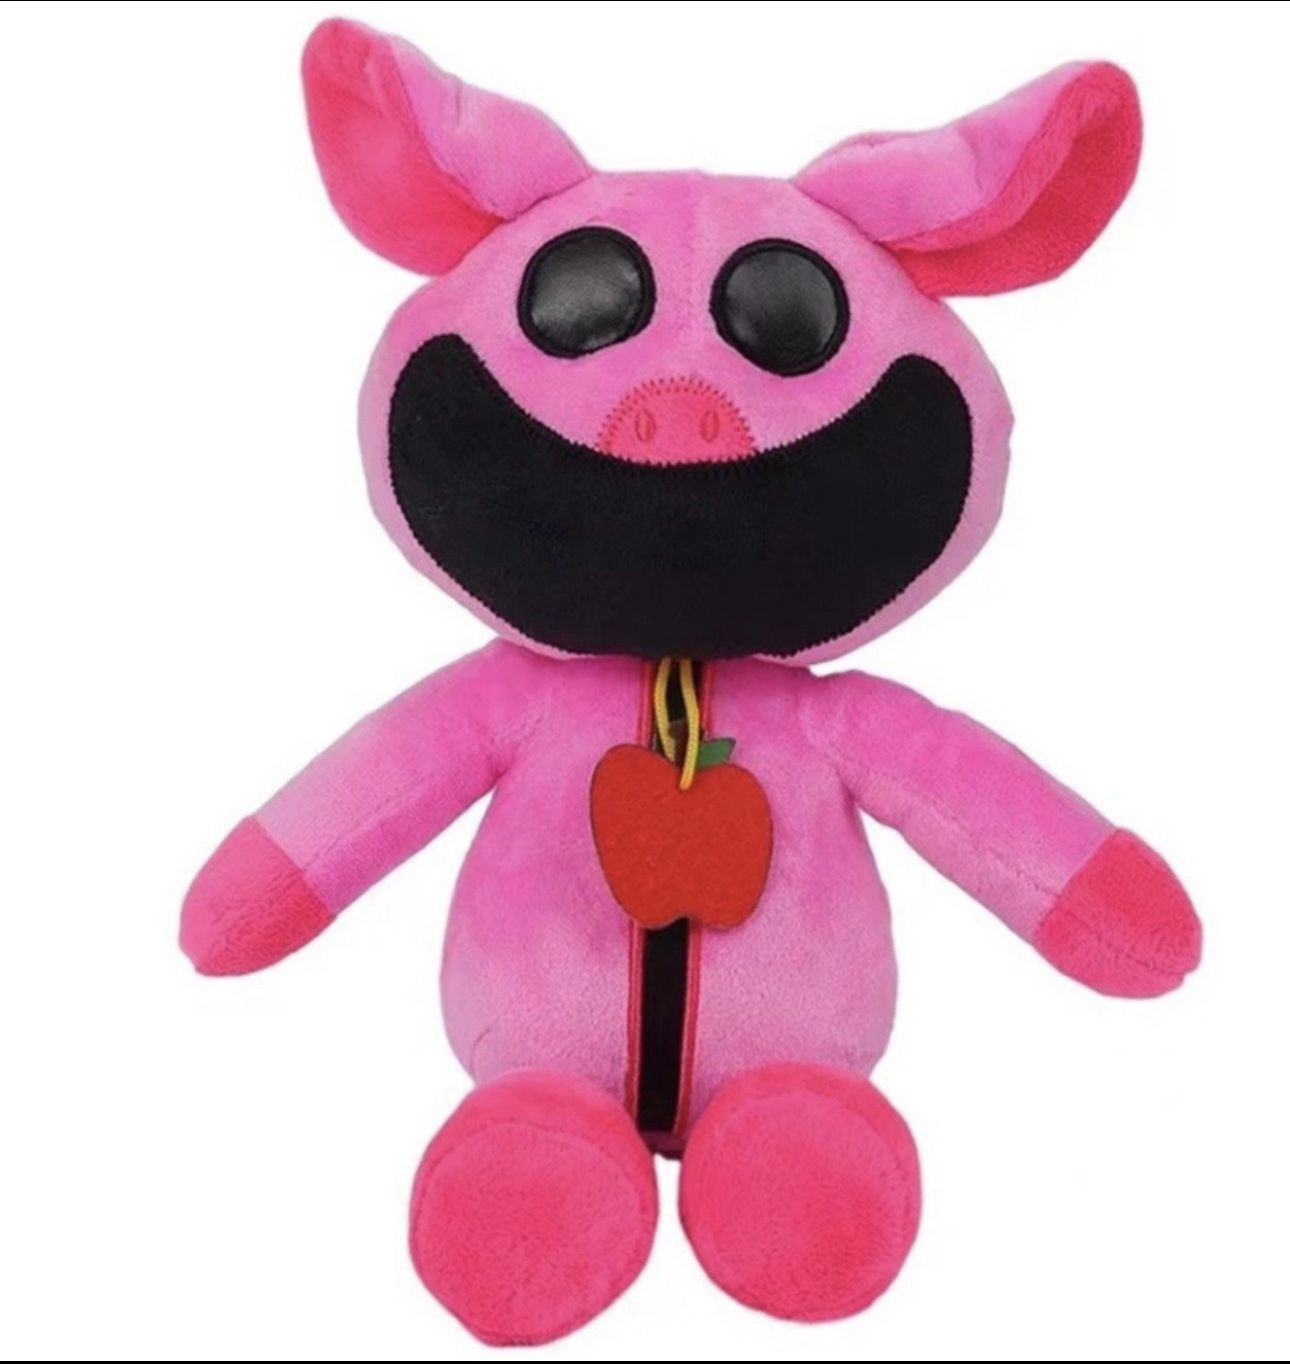 PP Poppy Playtime Smiling Critters Pickypiggy Deep Sleep Pink Pig Plushie 11"